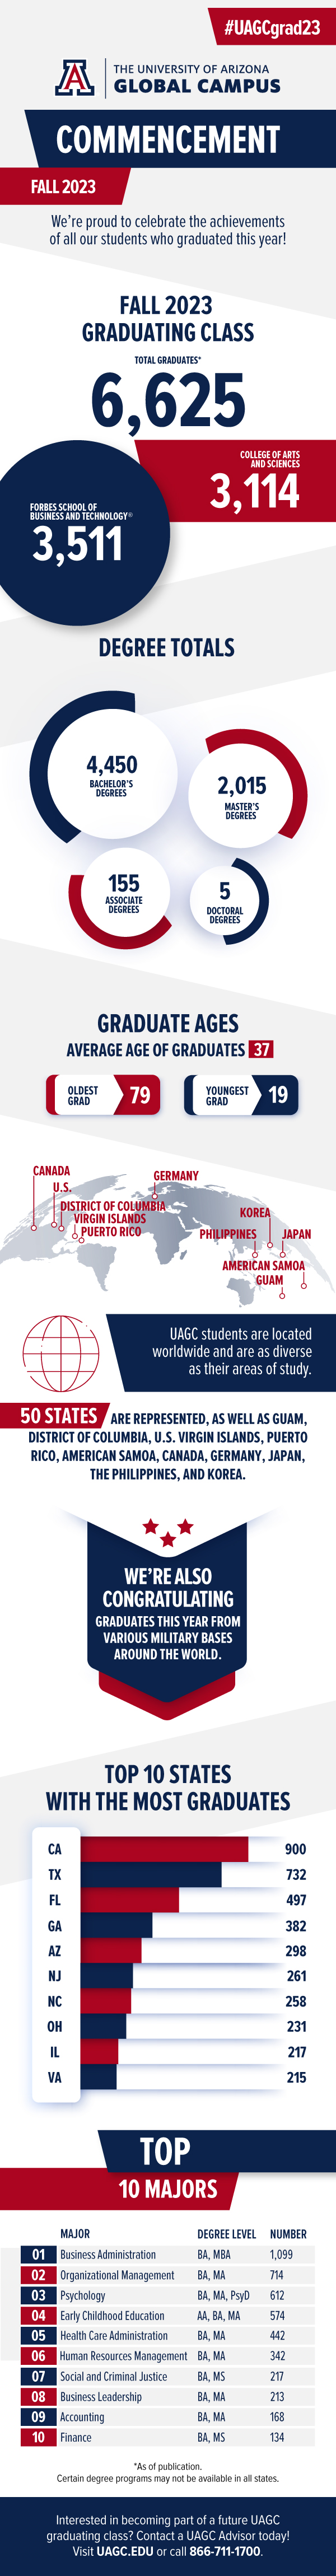 uagc fall 2023 commencement by the numbers